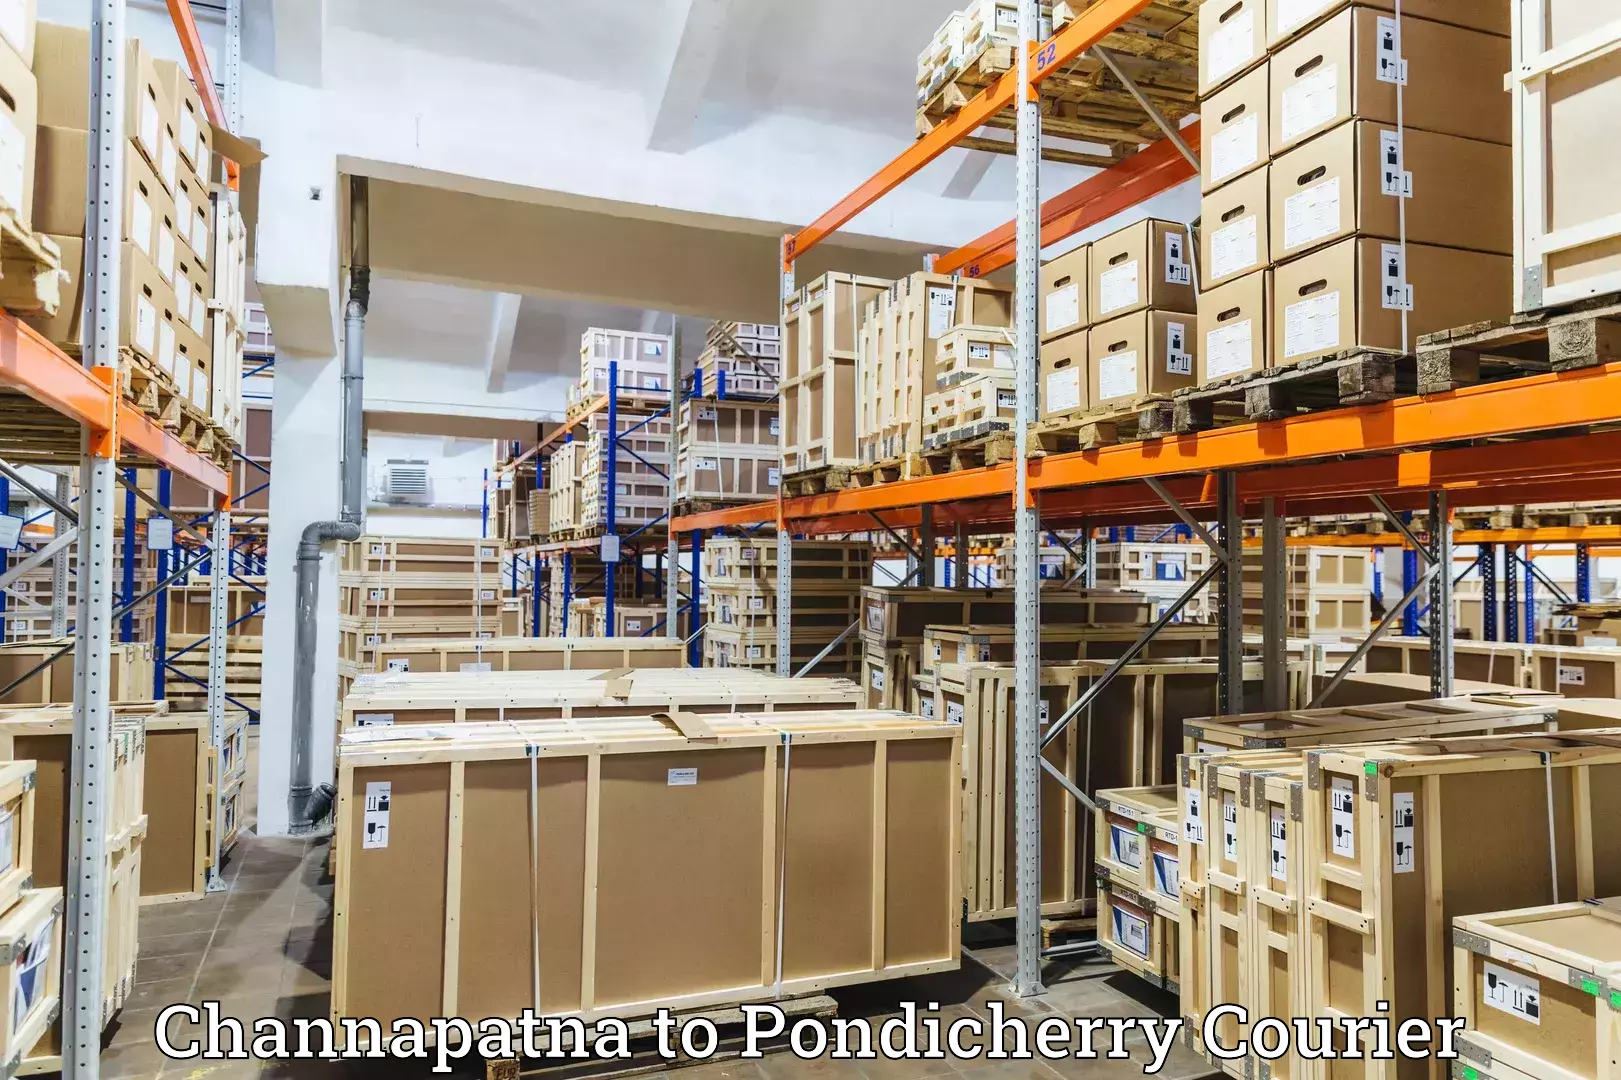 Delivery service partnership Channapatna to Pondicherry